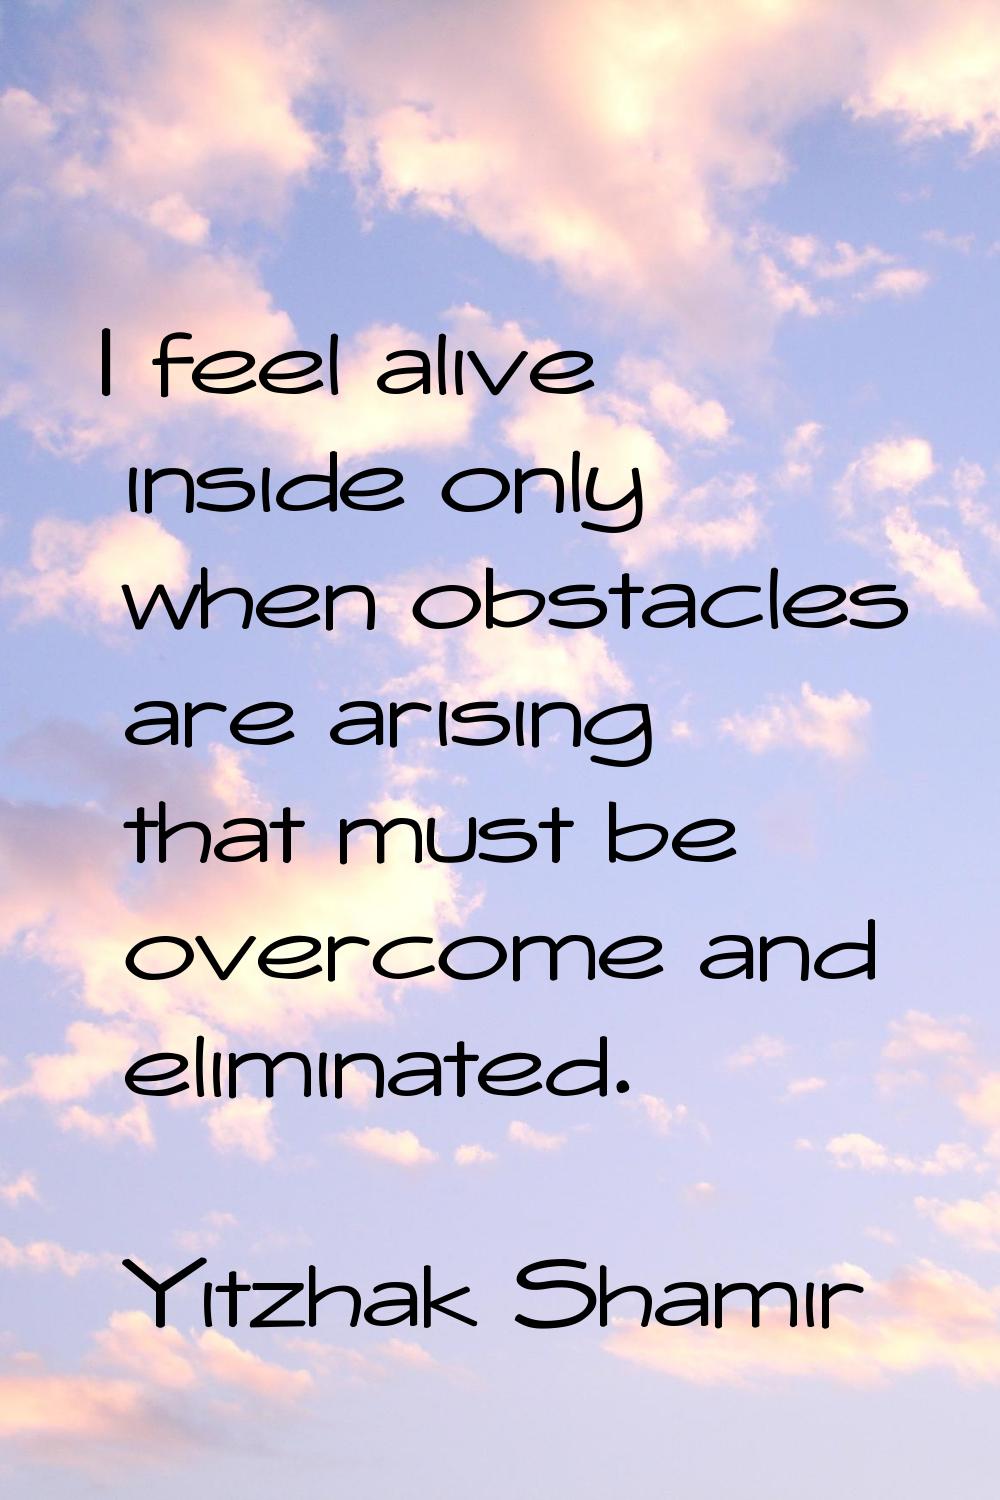 I feel alive inside only when obstacles are arising that must be overcome and eliminated.